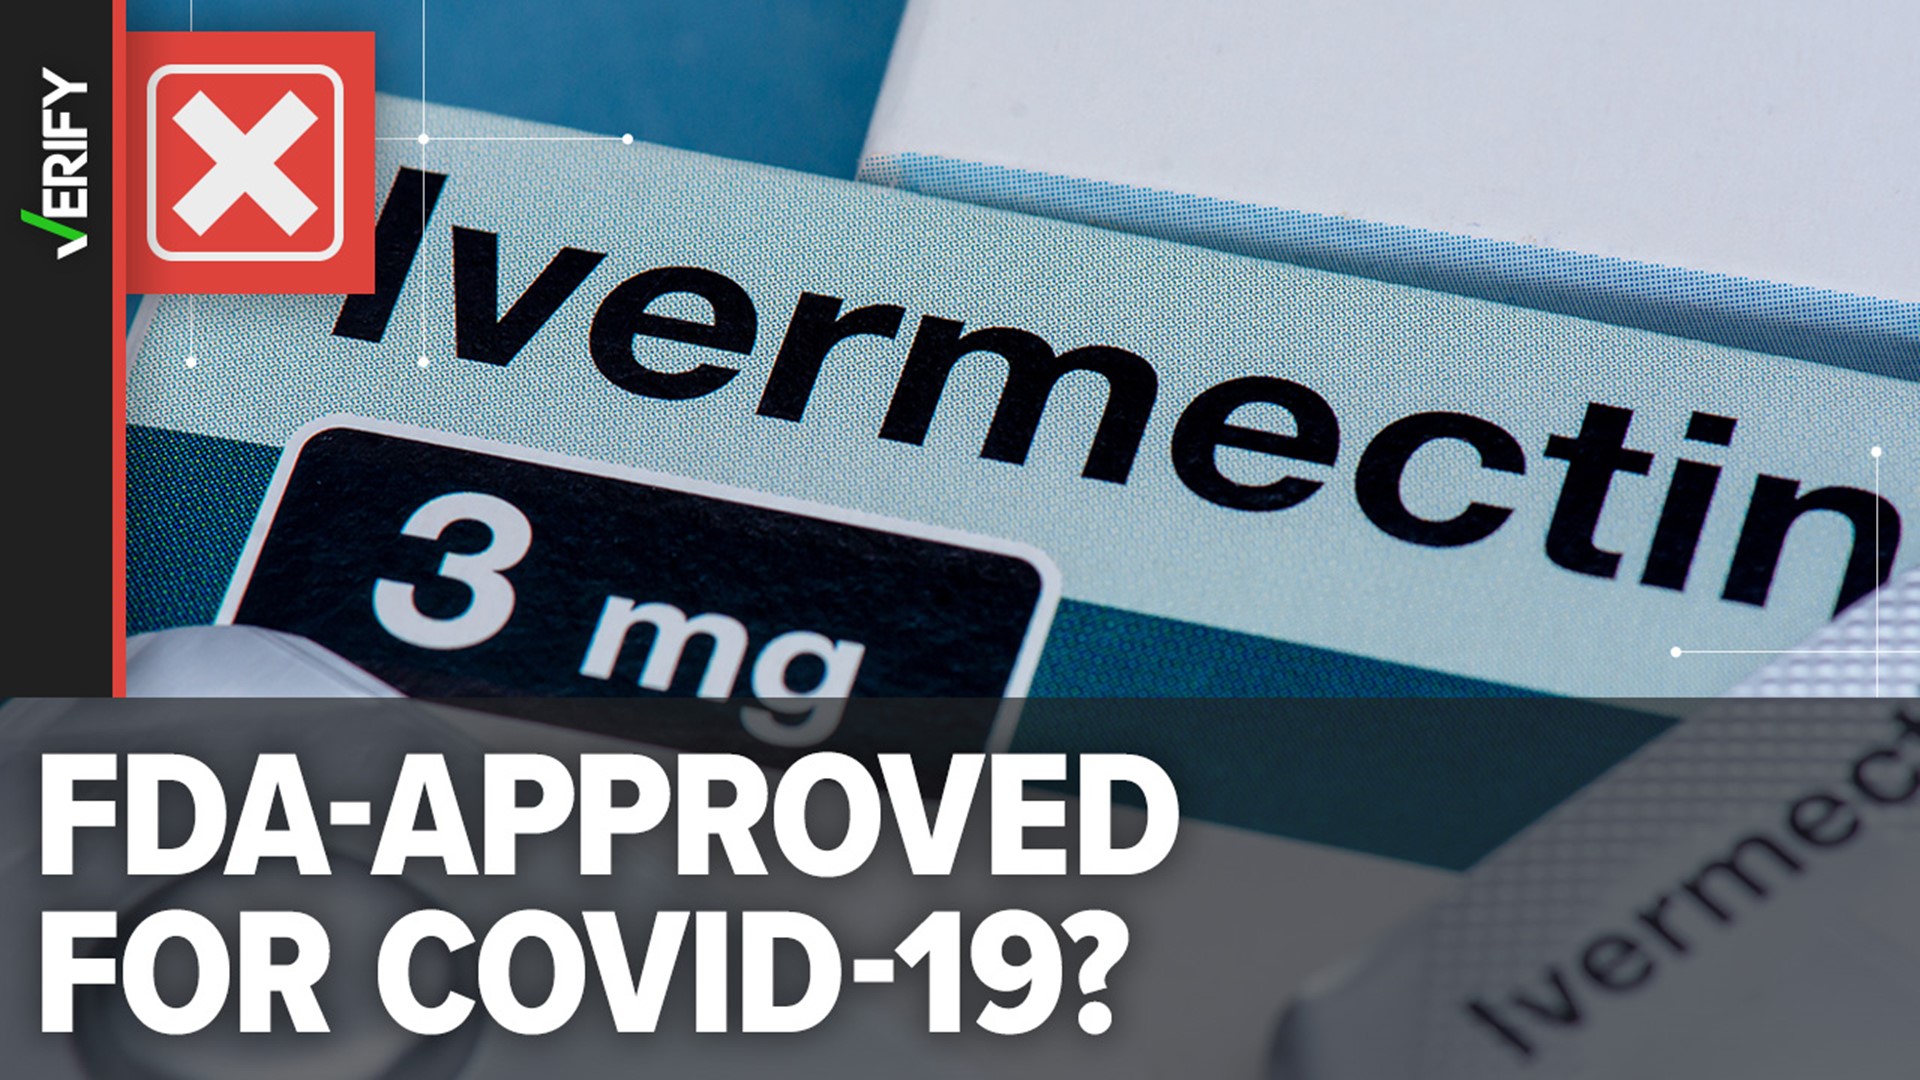 An interview on Fox Business Network sparked speculation that the FDA “quietly approved” ivermectin as treatment for COVID-19. That’s false.